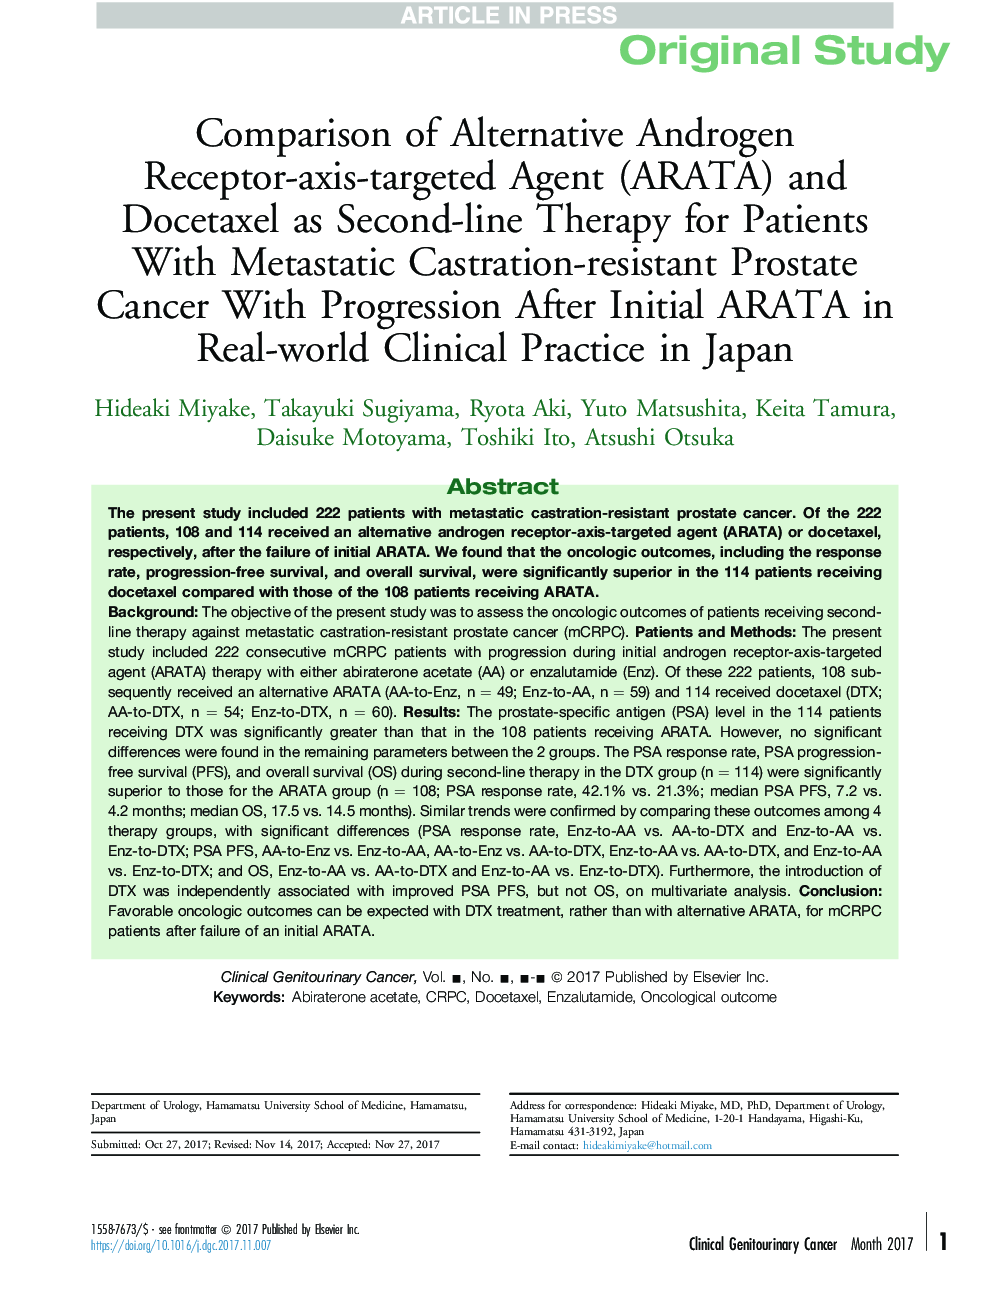 Comparison of Alternative Androgen Receptor-axis-targeted Agent (ARATA) and Docetaxel as Second-line Therapy for Patients With Metastatic Castration-resistant Prostate Cancer With Progression After Initial ARATA in Real-world Clinical Practice in Japan